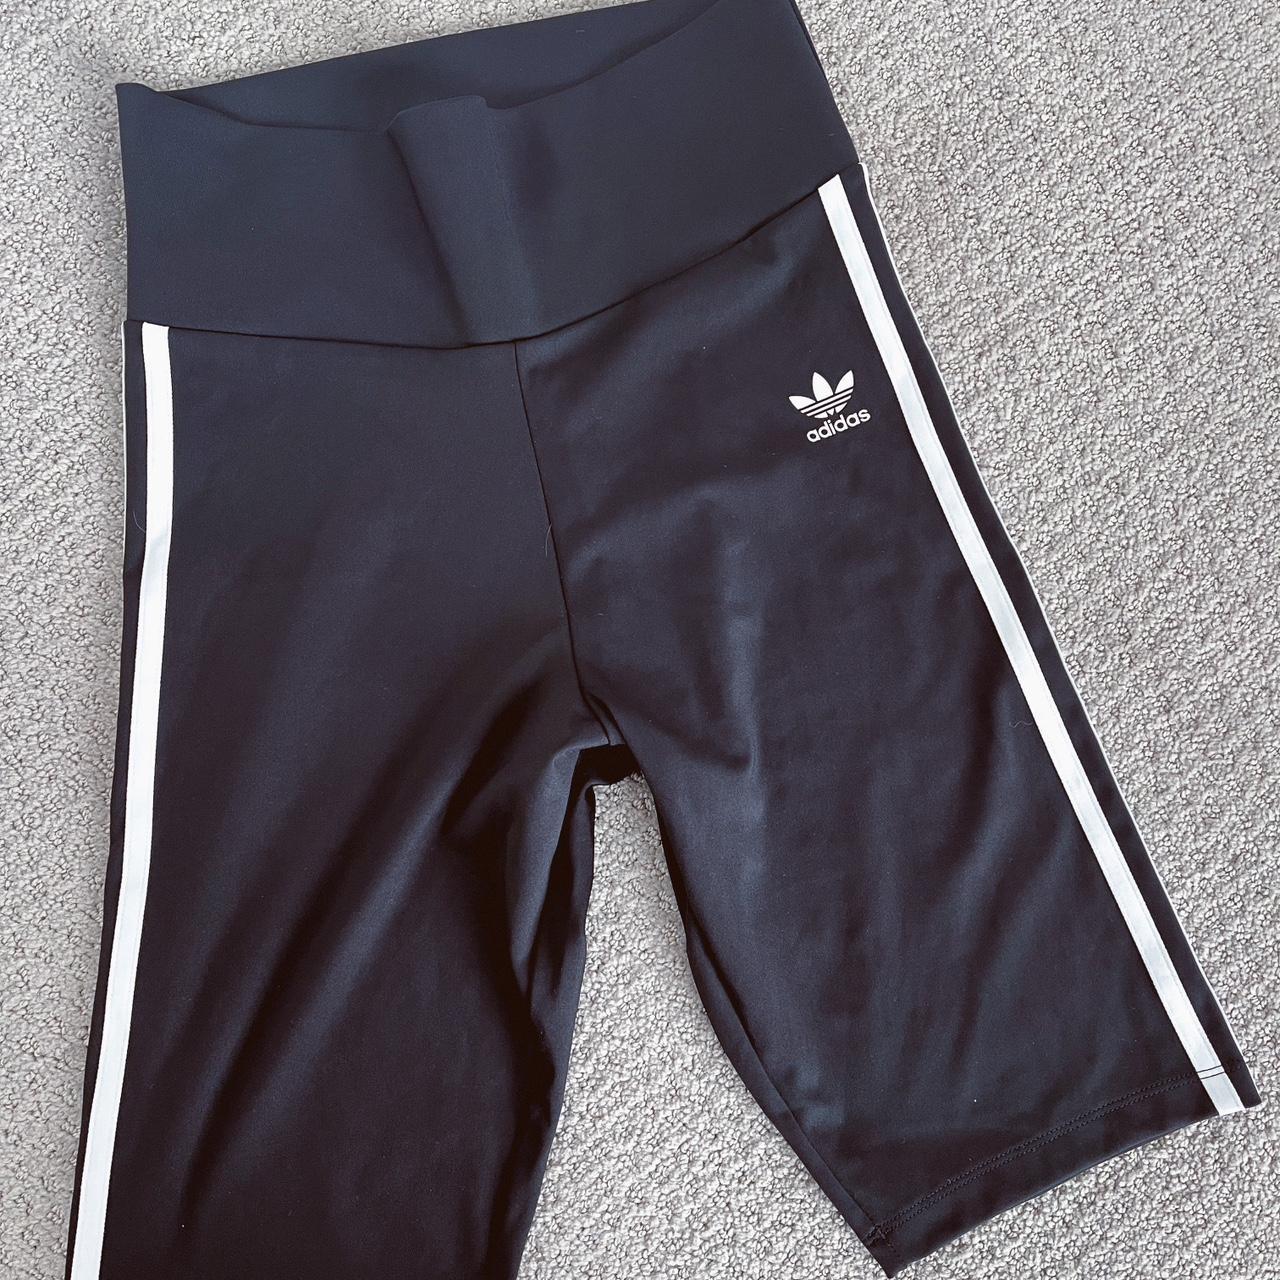 Adidas knee length shorts. Worn once! Size small but... - Depop